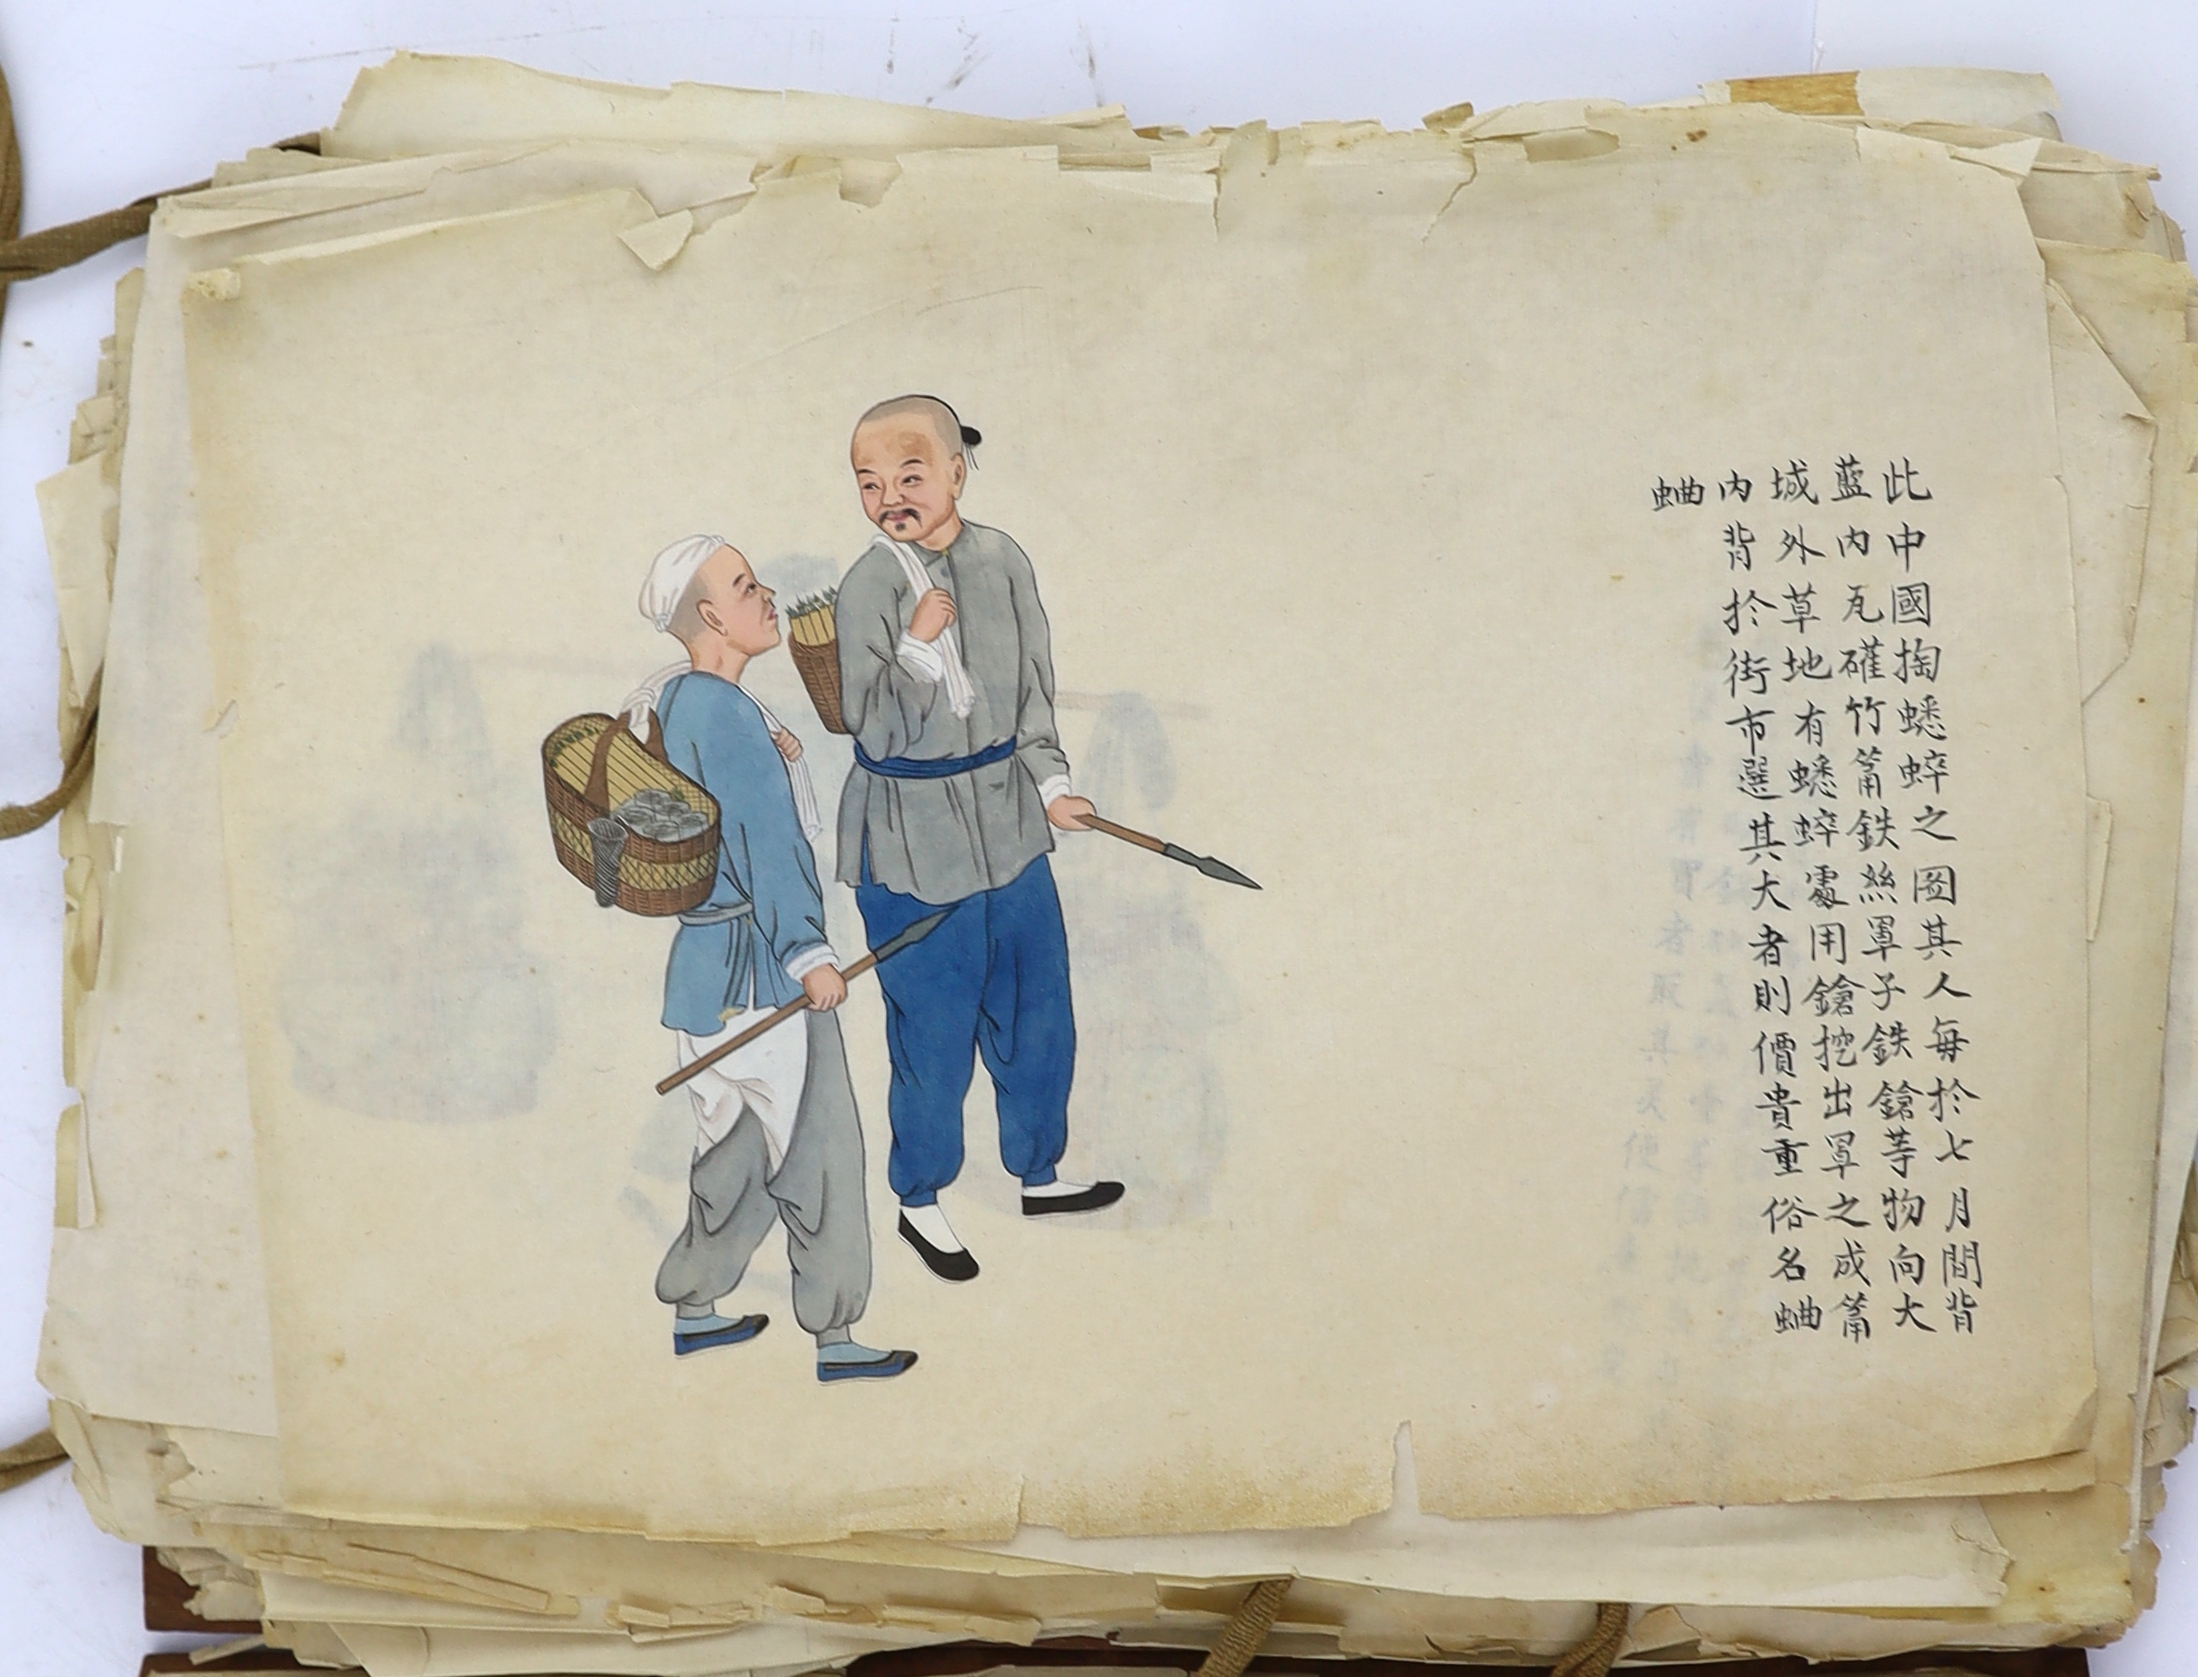 An album of Chinese watercolours on rice paper, trades and customs of China, late 19th / early 20th century, losses and tears to most pages